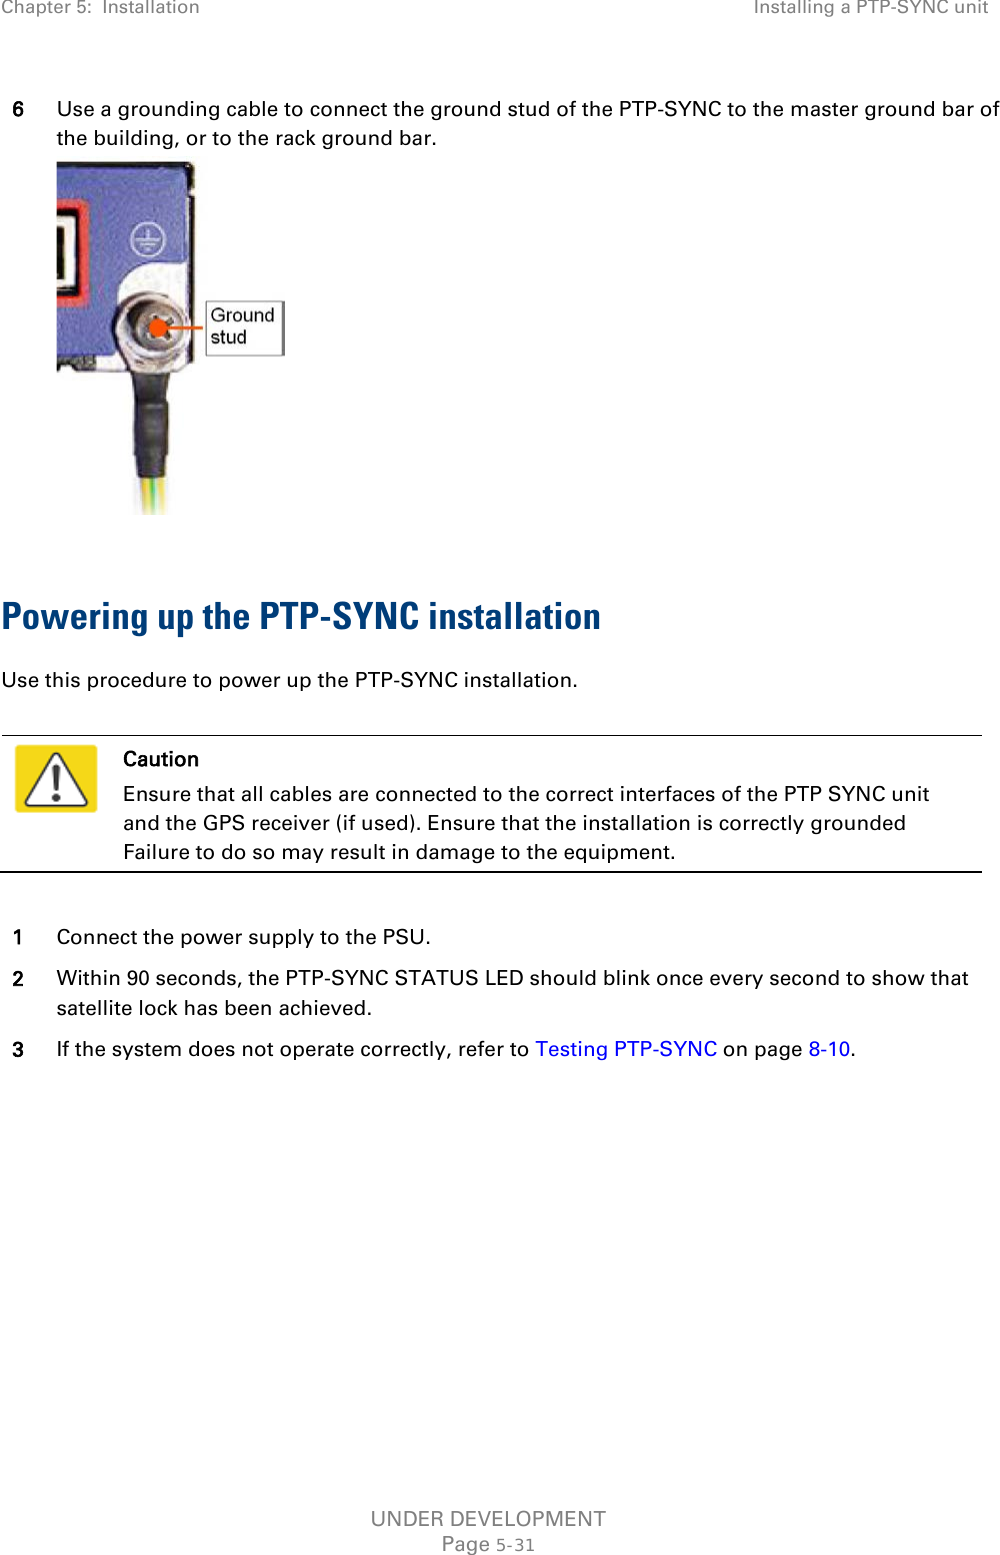 Chapter 5:  Installation Installing a PTP-SYNC unit  6 Use a grounding cable to connect the ground stud of the PTP-SYNC to the master ground bar of the building, or to the rack ground bar.   Powering up the PTP-SYNC installation Use this procedure to power up the PTP-SYNC installation.   Caution Ensure that all cables are connected to the correct interfaces of the PTP SYNC unit and the GPS receiver (if used). Ensure that the installation is correctly grounded Failure to do so may result in damage to the equipment.  1 Connect the power supply to the PSU. 2 Within 90 seconds, the PTP-SYNC STATUS LED should blink once every second to show that satellite lock has been achieved. 3 If the system does not operate correctly, refer to Testing PTP-SYNC on page 8-10. UNDER DEVELOPMENT Page 5-31 